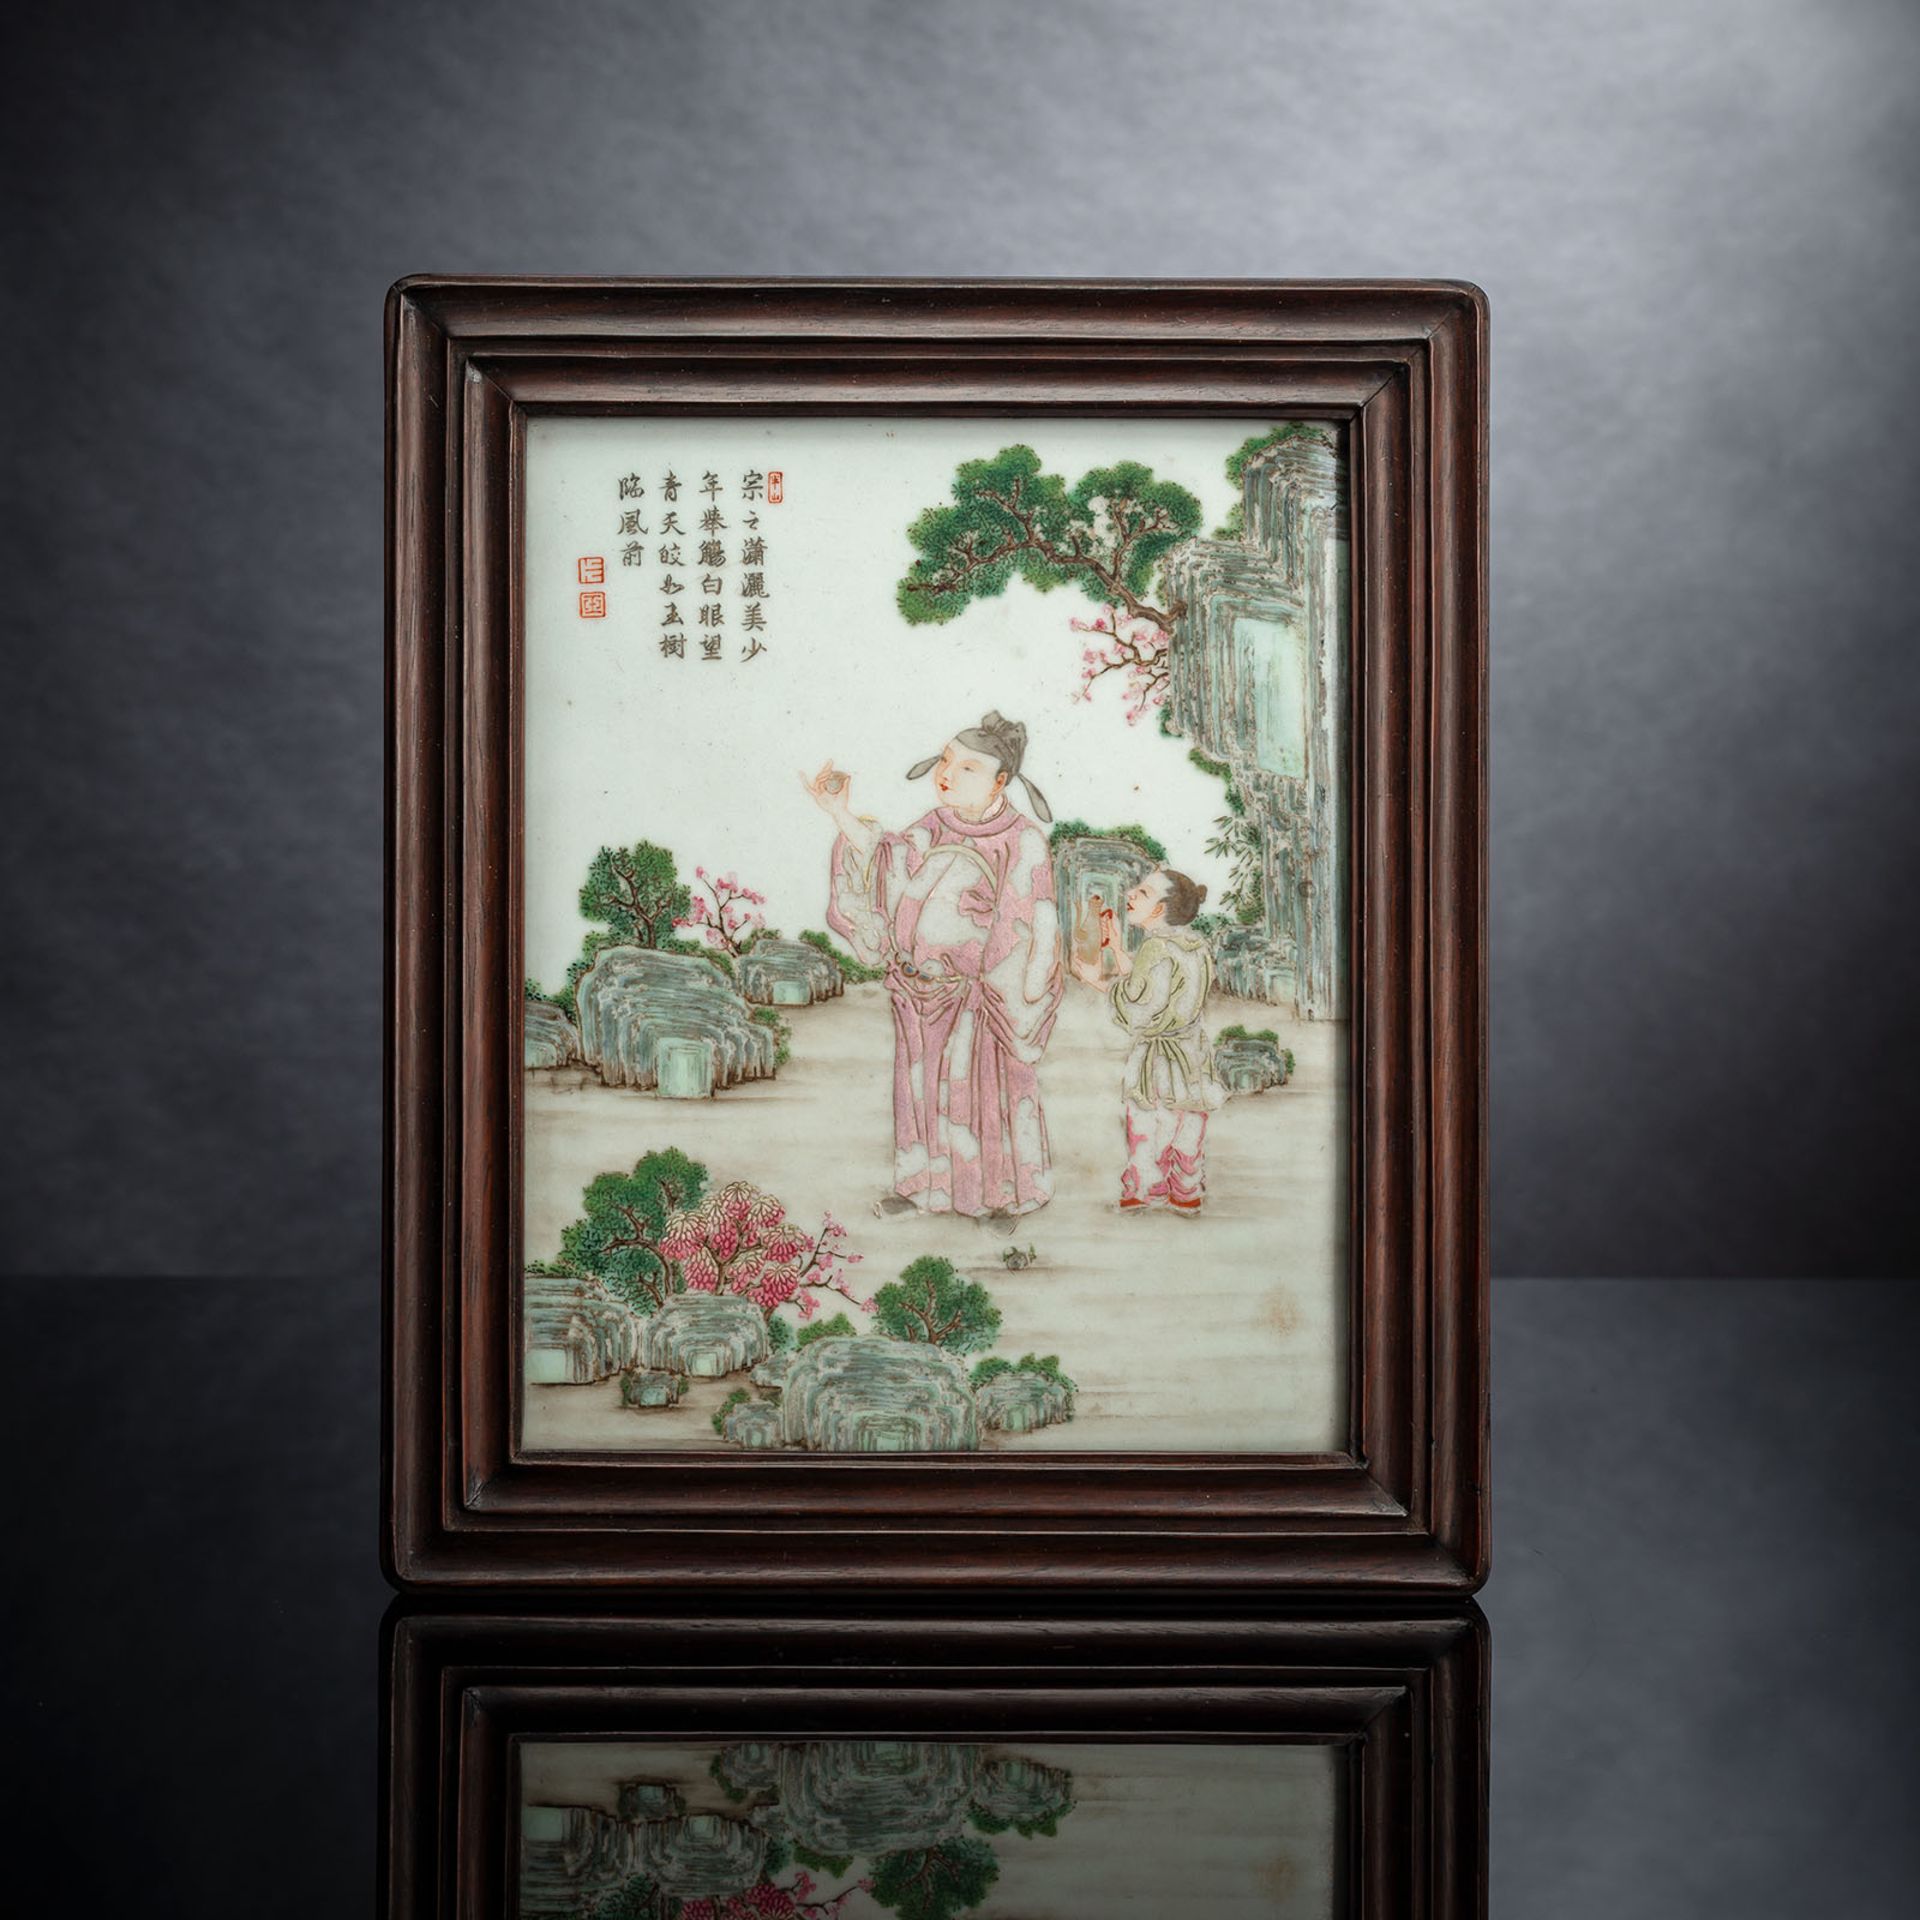 A FINE PORCELAIN PANEL WITH CUI ZONGZHI AS TANG PERIOD SCHOLAR AND POEM IN THE STLYE OF TANG YING (